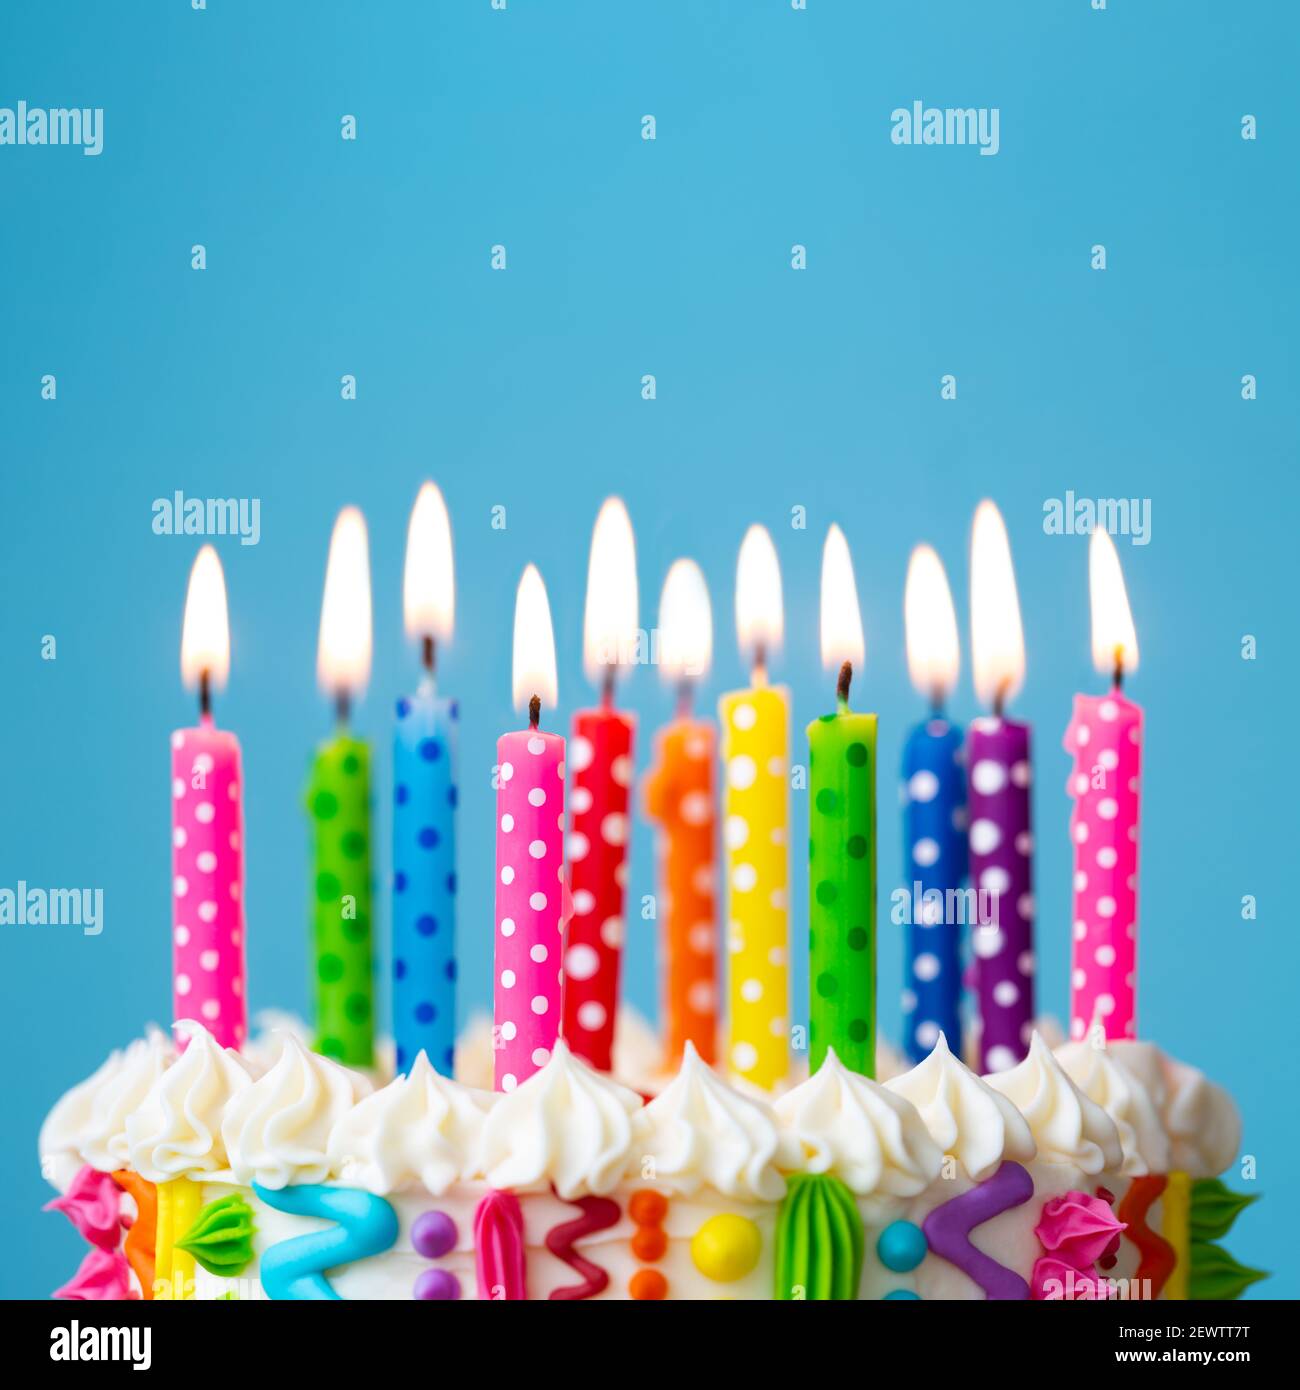 Colorful birthday cake with rainbow colored candles Stock Photo